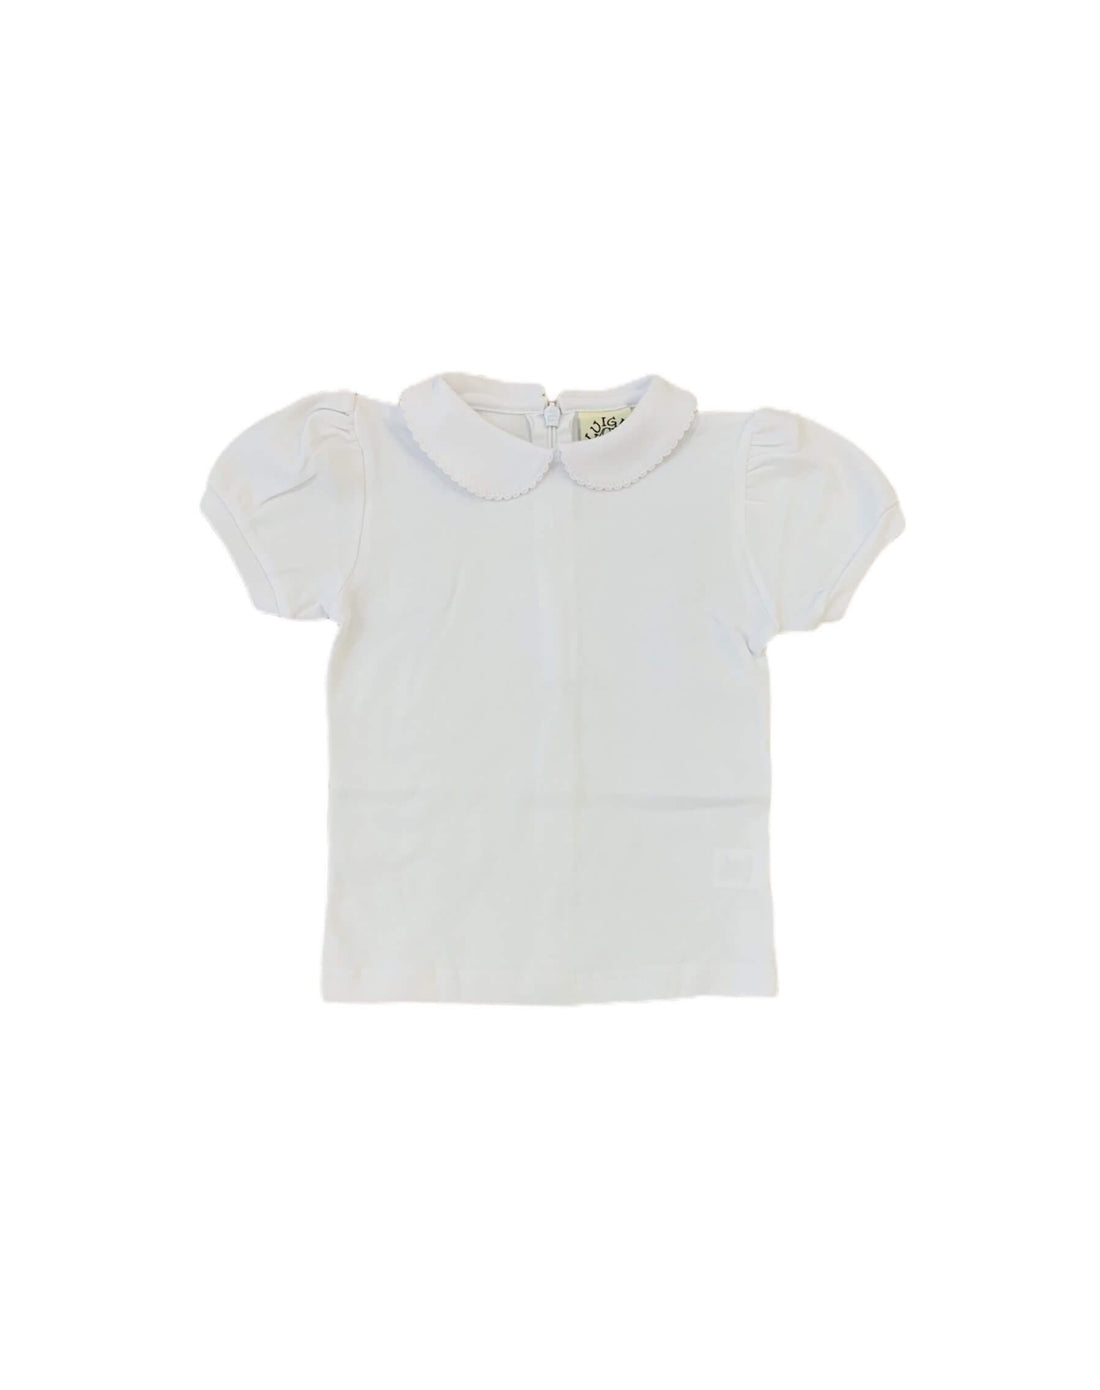 White Girls Peter Pan Top with collar and puffed sleeves